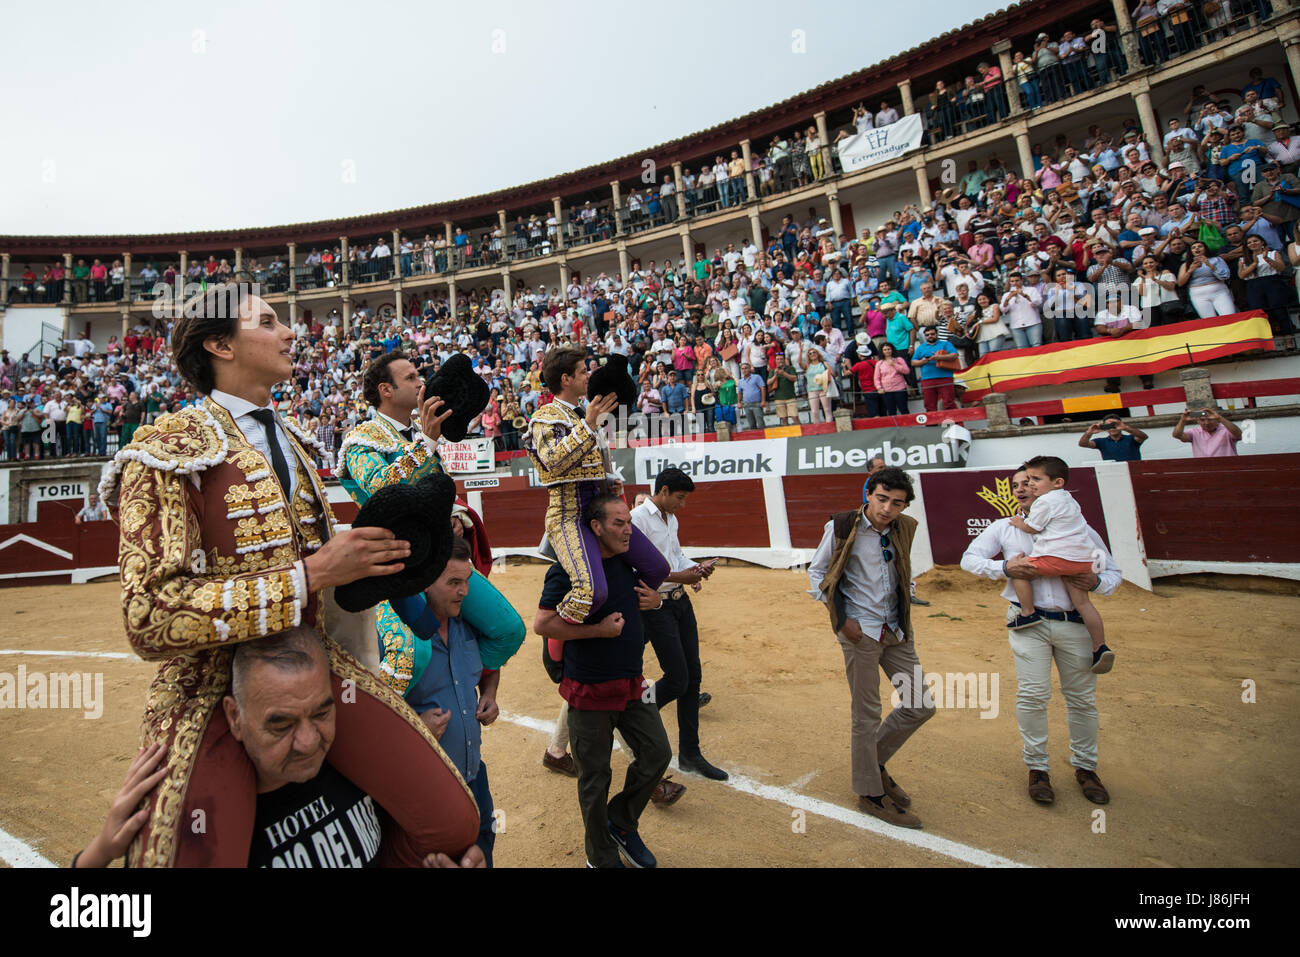 Caceres, Spain. 27th May, 2017. Peruvian bullfighter Andres Roca Rey and Spanish bullfighters Antonio Ferrera and Julián Lopez 'El Juli' are carried on the shoulders of bullfighting fans during the San Fernando Fair at the bullring in Cáceres, Spain. Credit: Esteban Martinena Guerrero/Alamy Live News Stock Photo